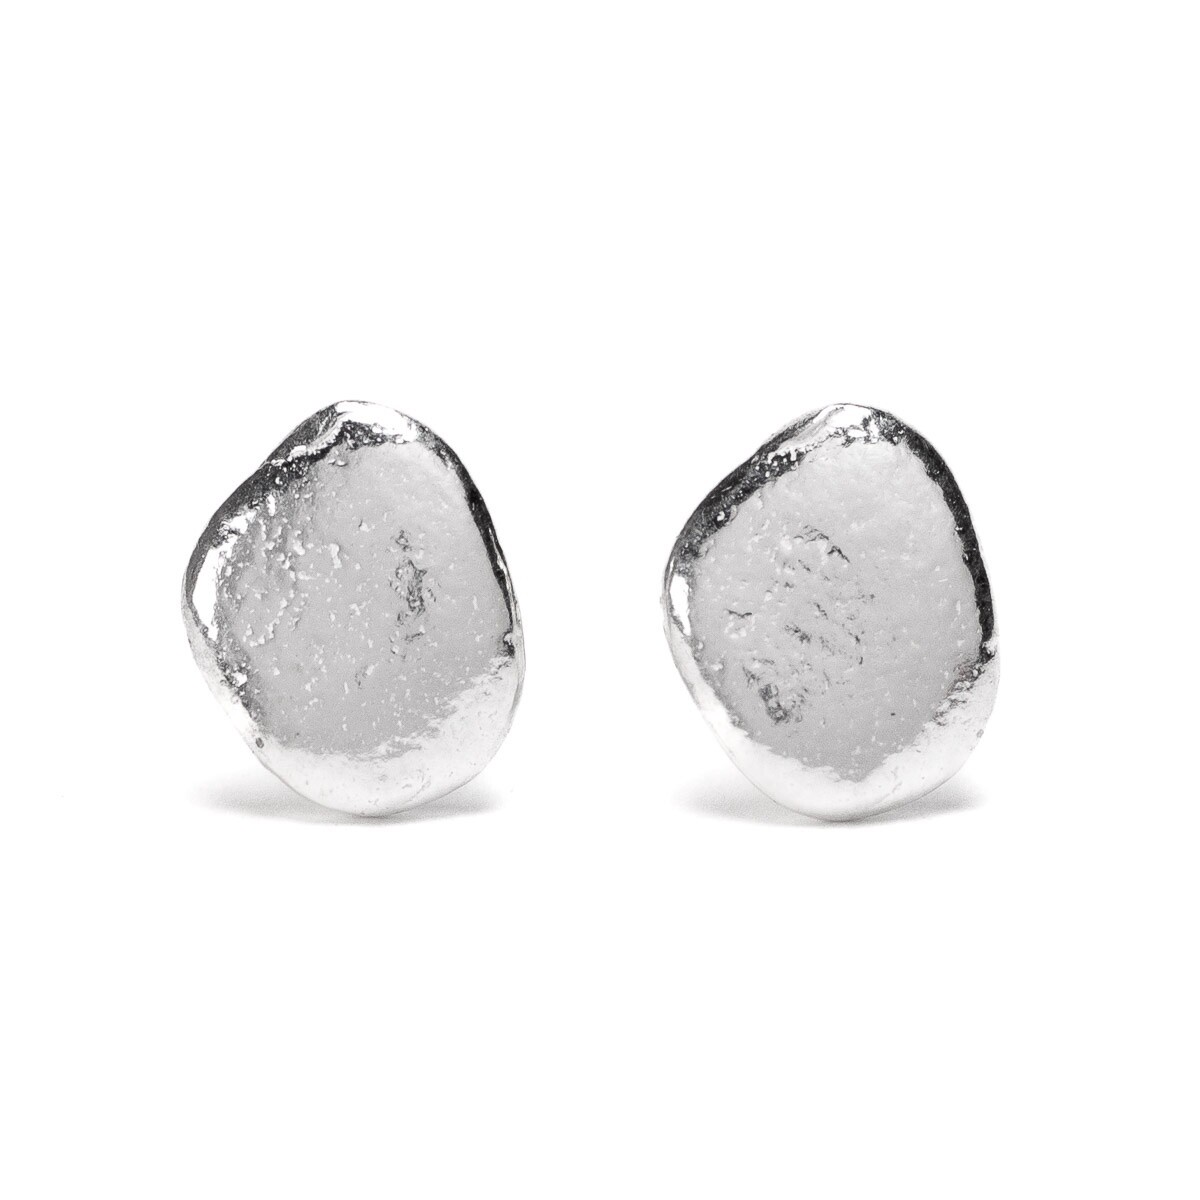 Pebble Silver Stud Earrings Smooth by Silverfish